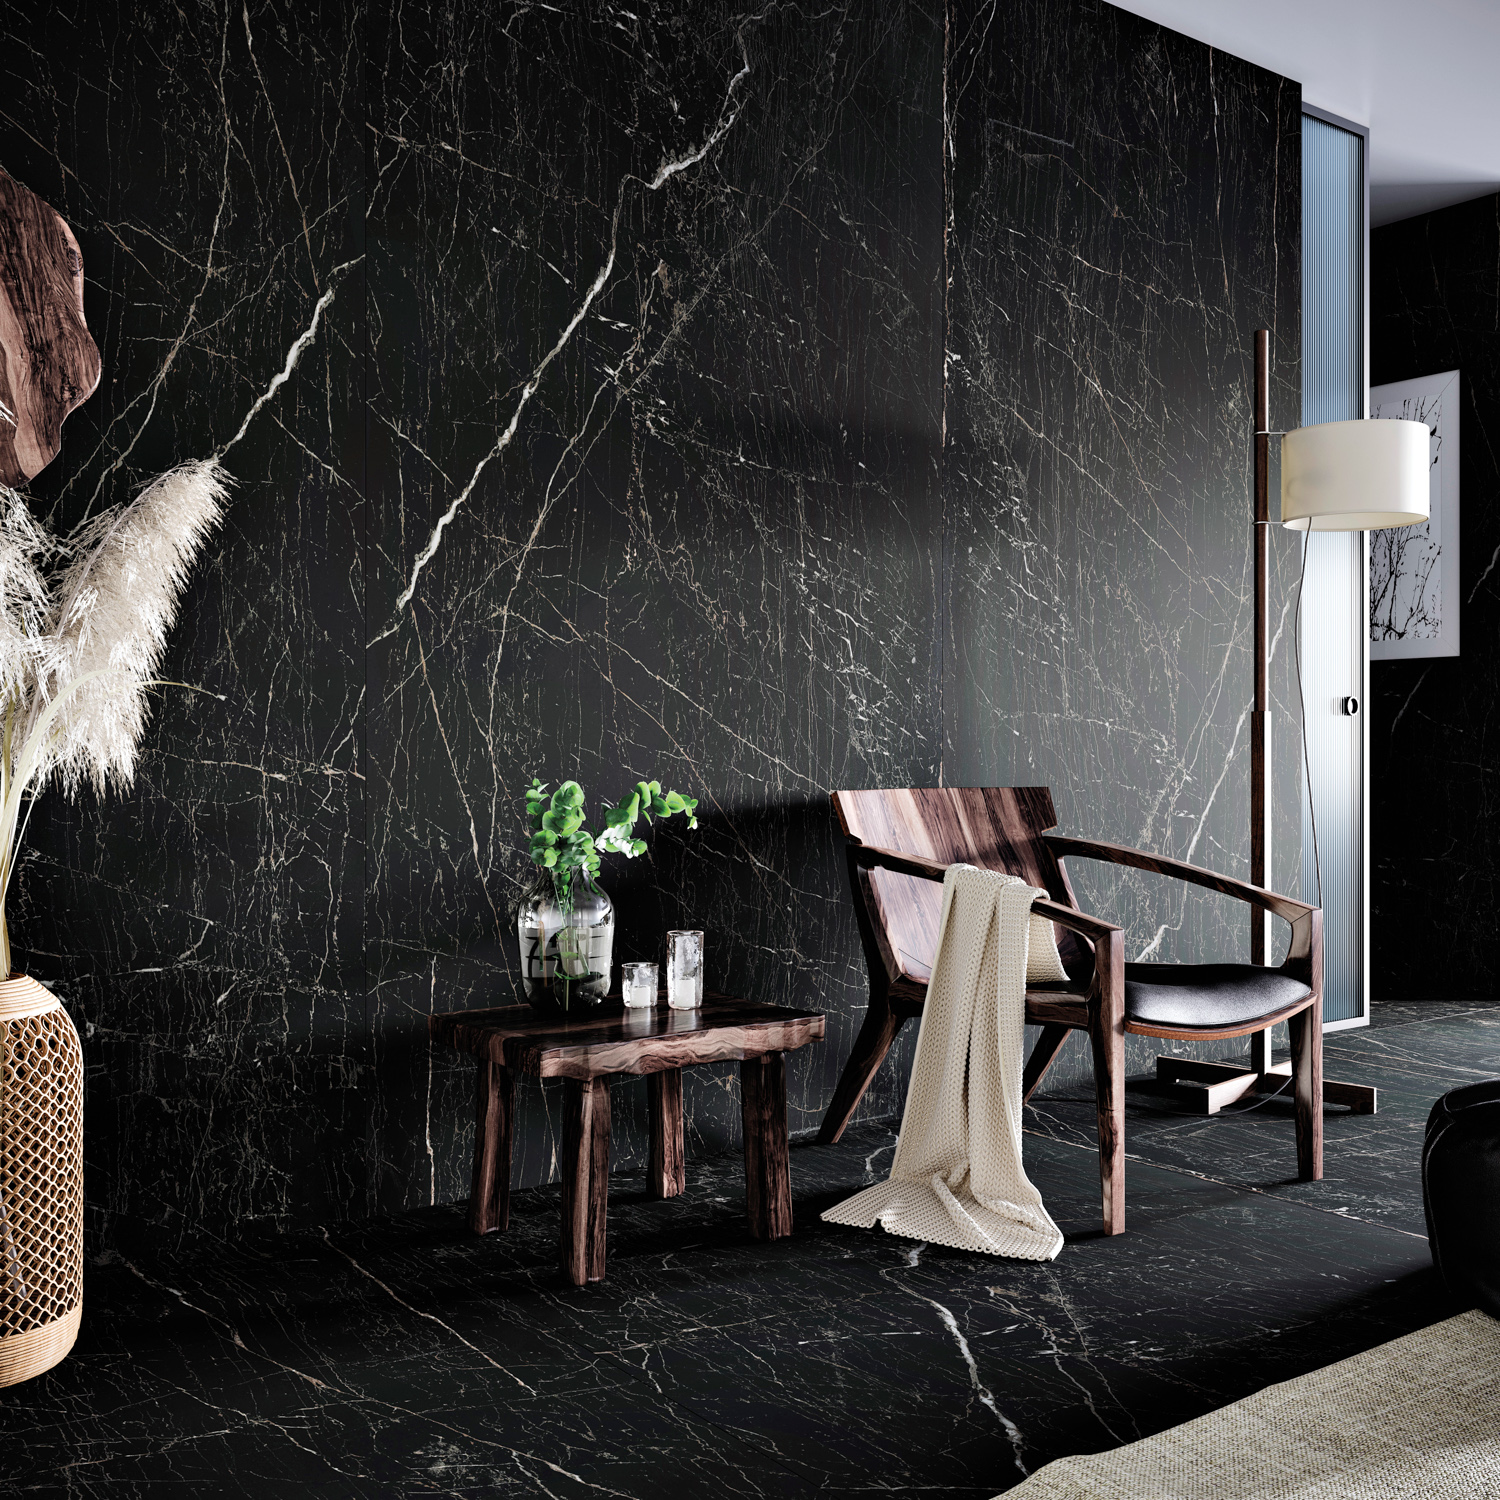 white-veined black marble-inspired material runs floor to ceiling grounding a seating area with a dark walnut chair and side table